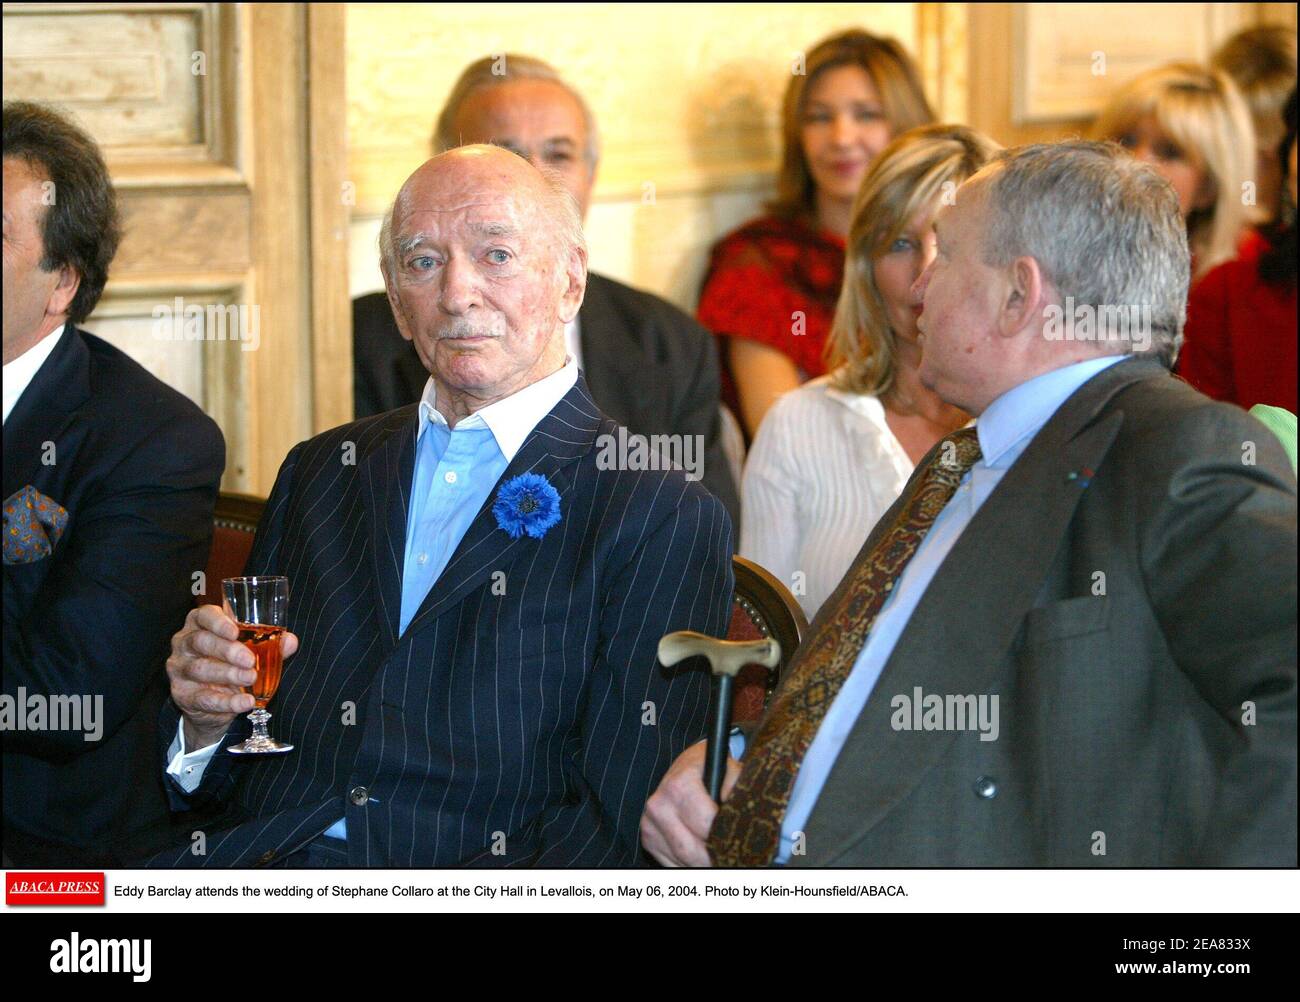 Eddie Barclay attends the wedding of Stephane Collaro at the City Hall in Levallois, on May 06, 2004. Photo by Klein-Hounsfield/ABACA. Stock Photo